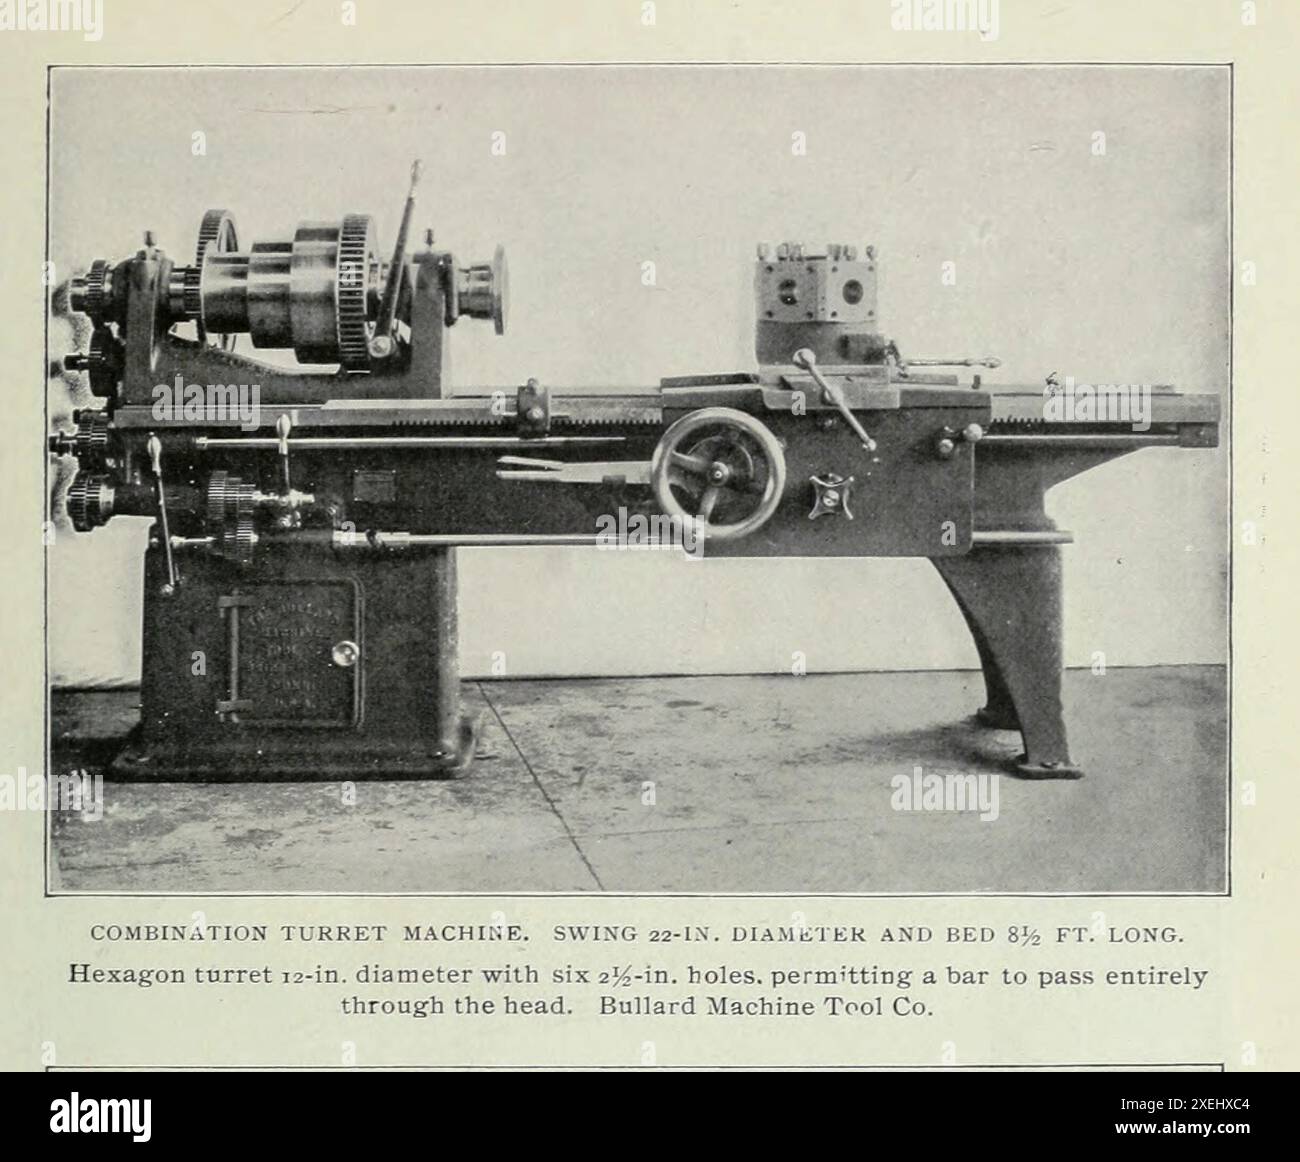 COMBINATION TURRET MACHINE from the Article THE REVOLUTION IN MACHINE-SHOP PRACTICE. By Henry Roland. Part III APPLICATION OF THE TURRET TO GENERAL MACHINE-SHOP WORK. from The Engineering Magazine Devoted to Industrial Progress Volume XVIII 1899-1900 The Engineering Magazine Co Stock Photo